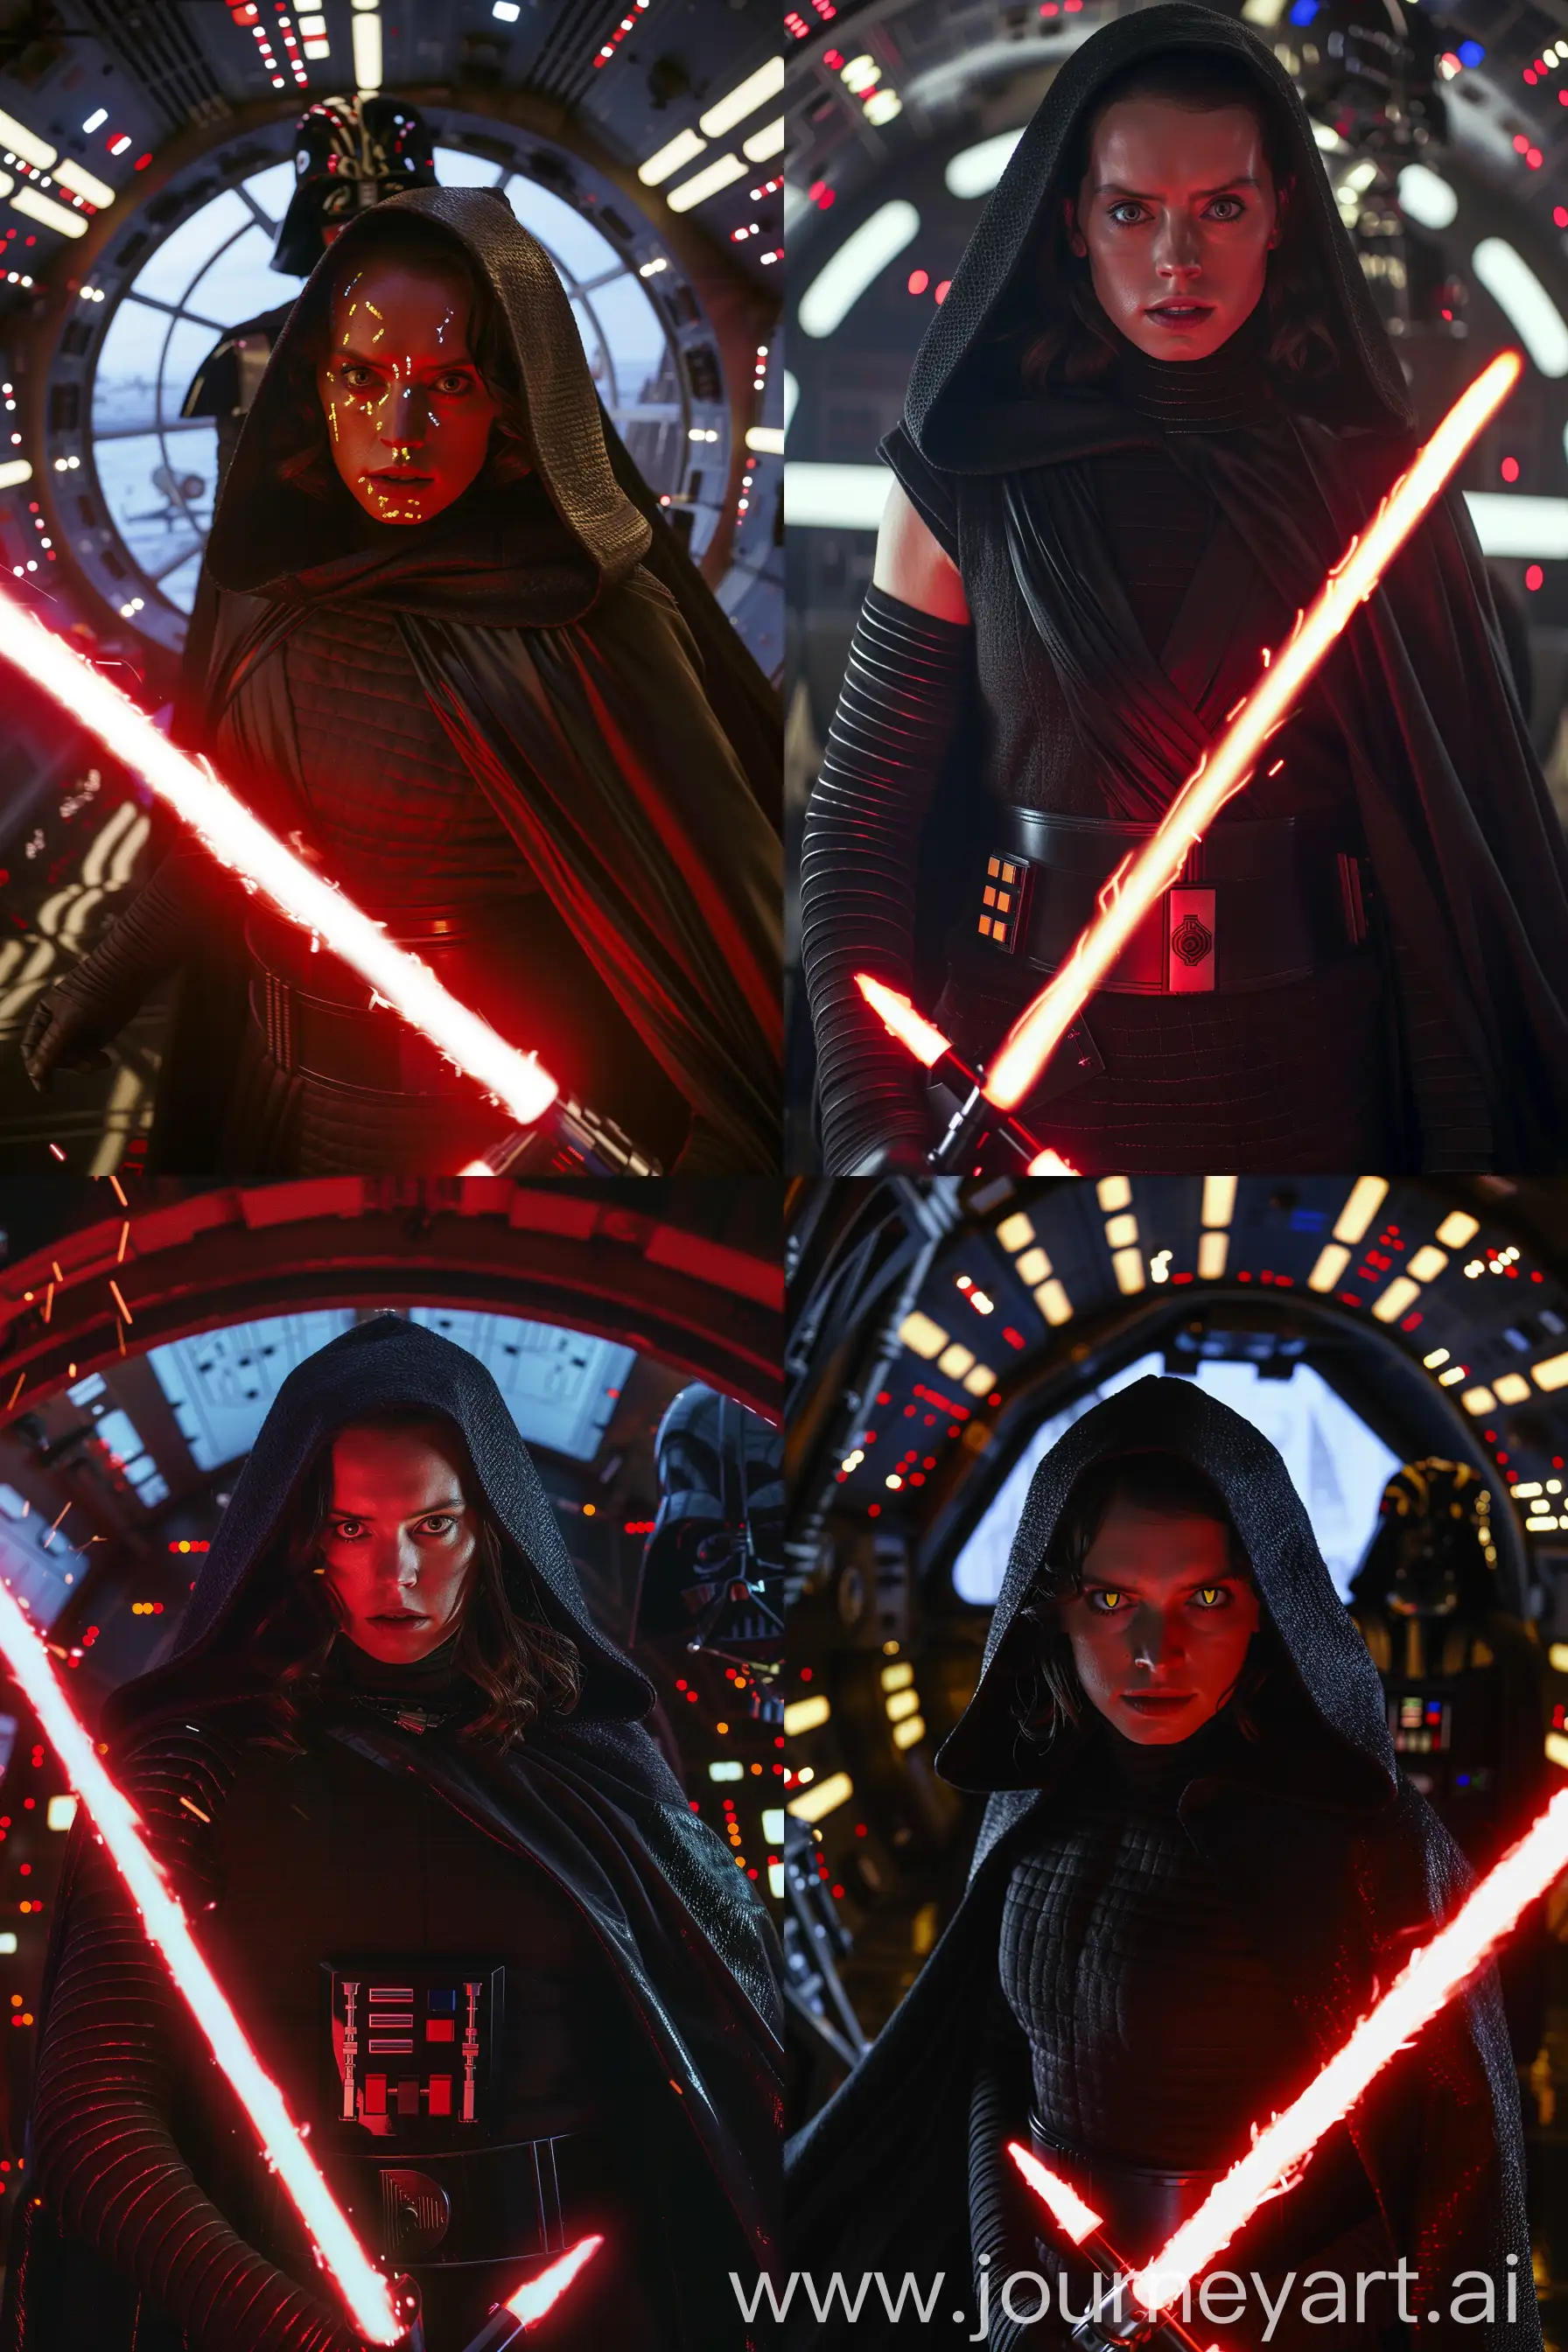 Cinematic Still film scenes off New Movie of Star Wars, fullbody Sith Rey With Daisy Ridley's face, with a red double-bladed lightsaber,  wearing all black, wearing a black cape and a hood, fiery yellow sith eyes, live action, Inside of Spaceship With Darth Vader,  --v 6.0 --style raw --ar 2:3